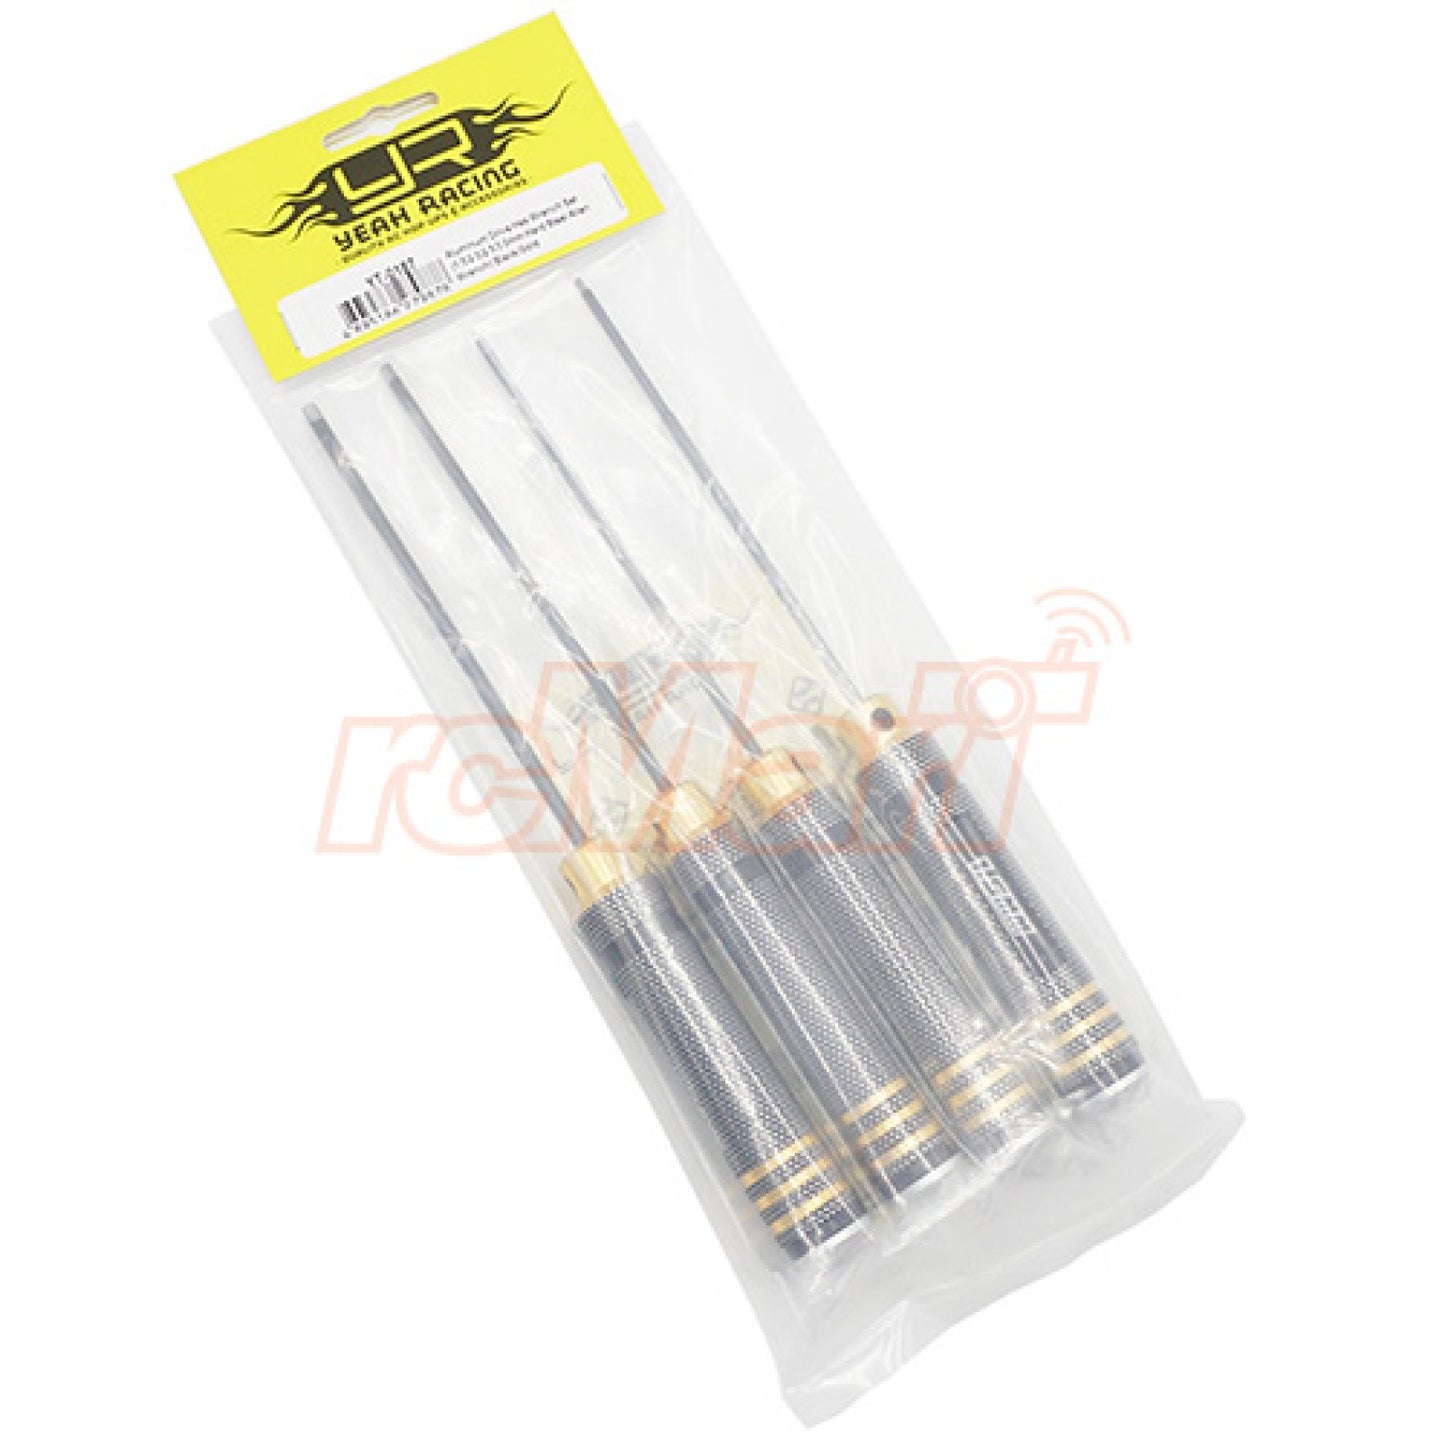 Aluminum Drive Hex Wrench Set (1.5/2.0/2.5/3.0mm Spring Steel Allen Wrench) Black/Gold